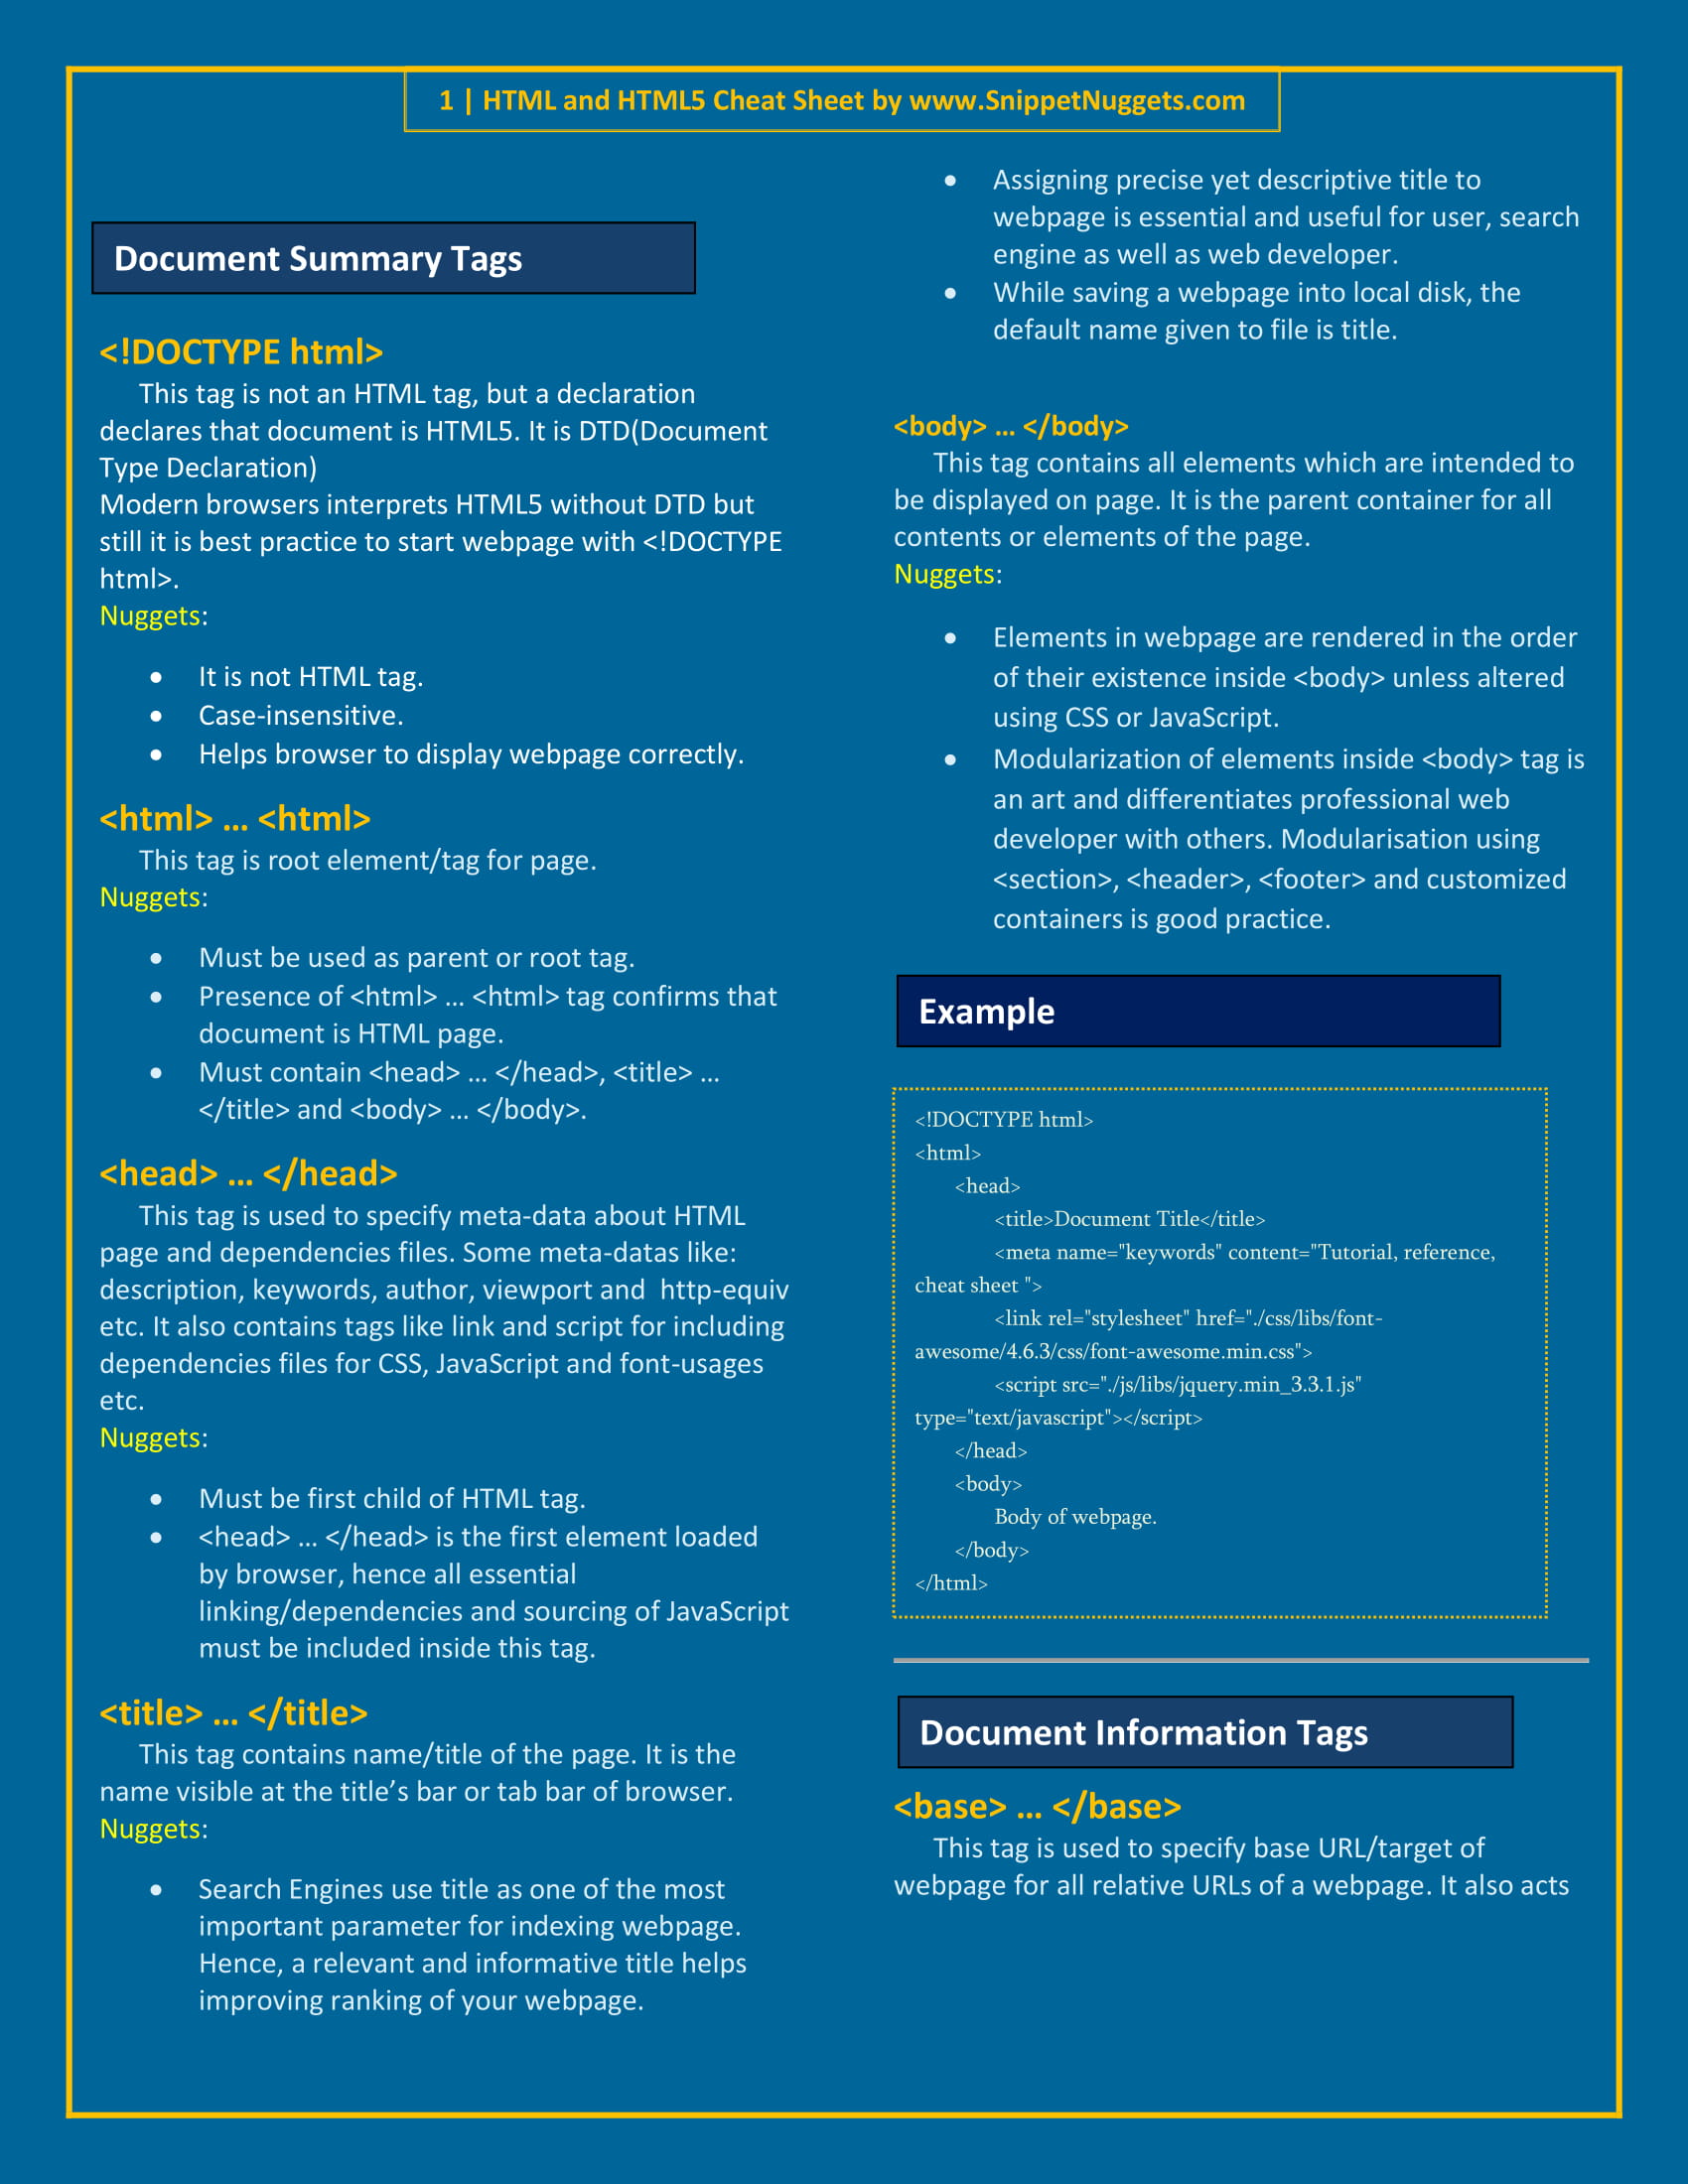 html cheat sheet for 2019 document summary tags html head title body  www.snippetnuggets.com